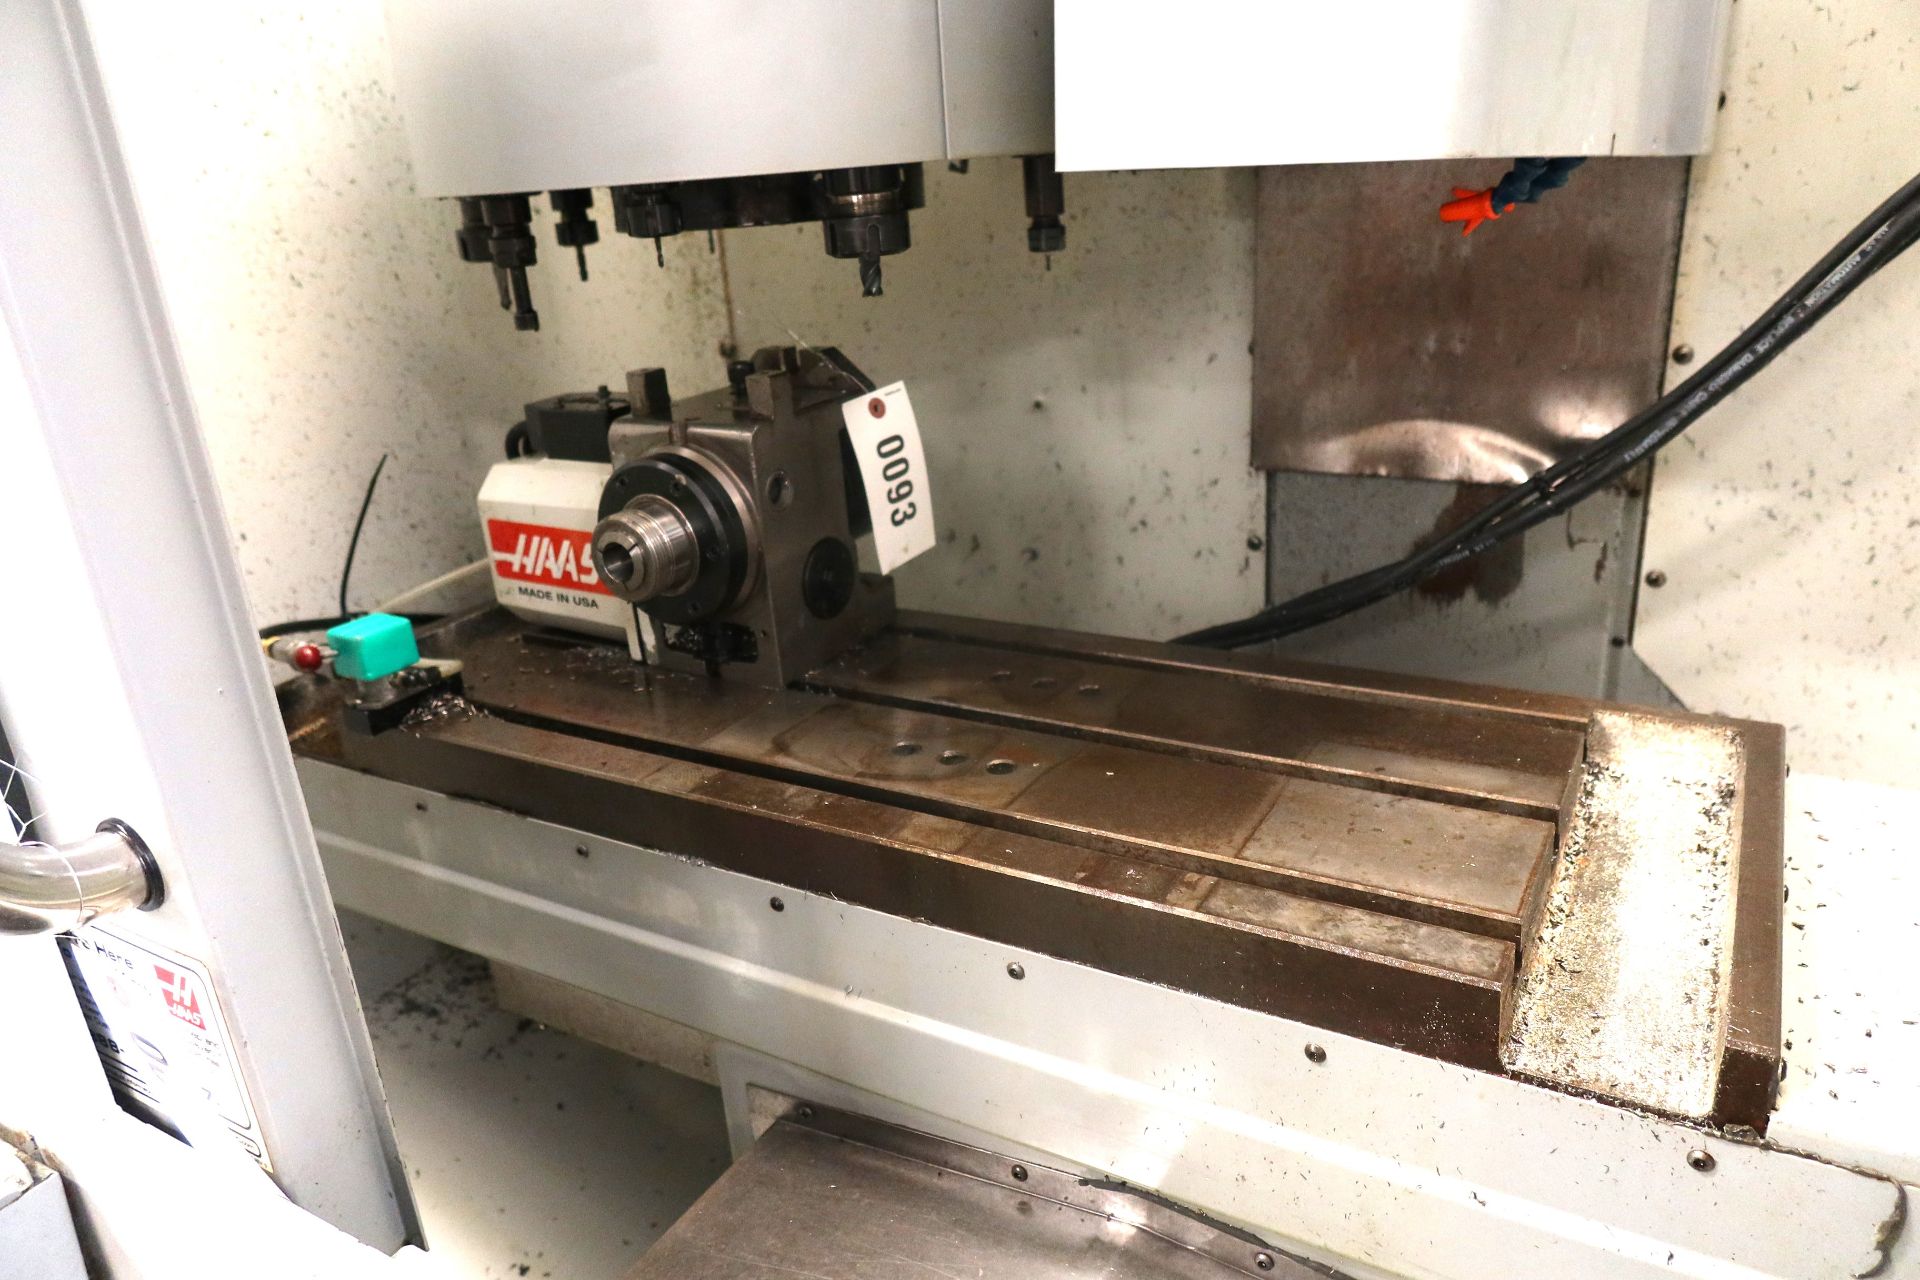 2006 Haas Mini Mill CNC 4-Axis Vertical Machining Center, SN 1053877 - Image 3 of 7